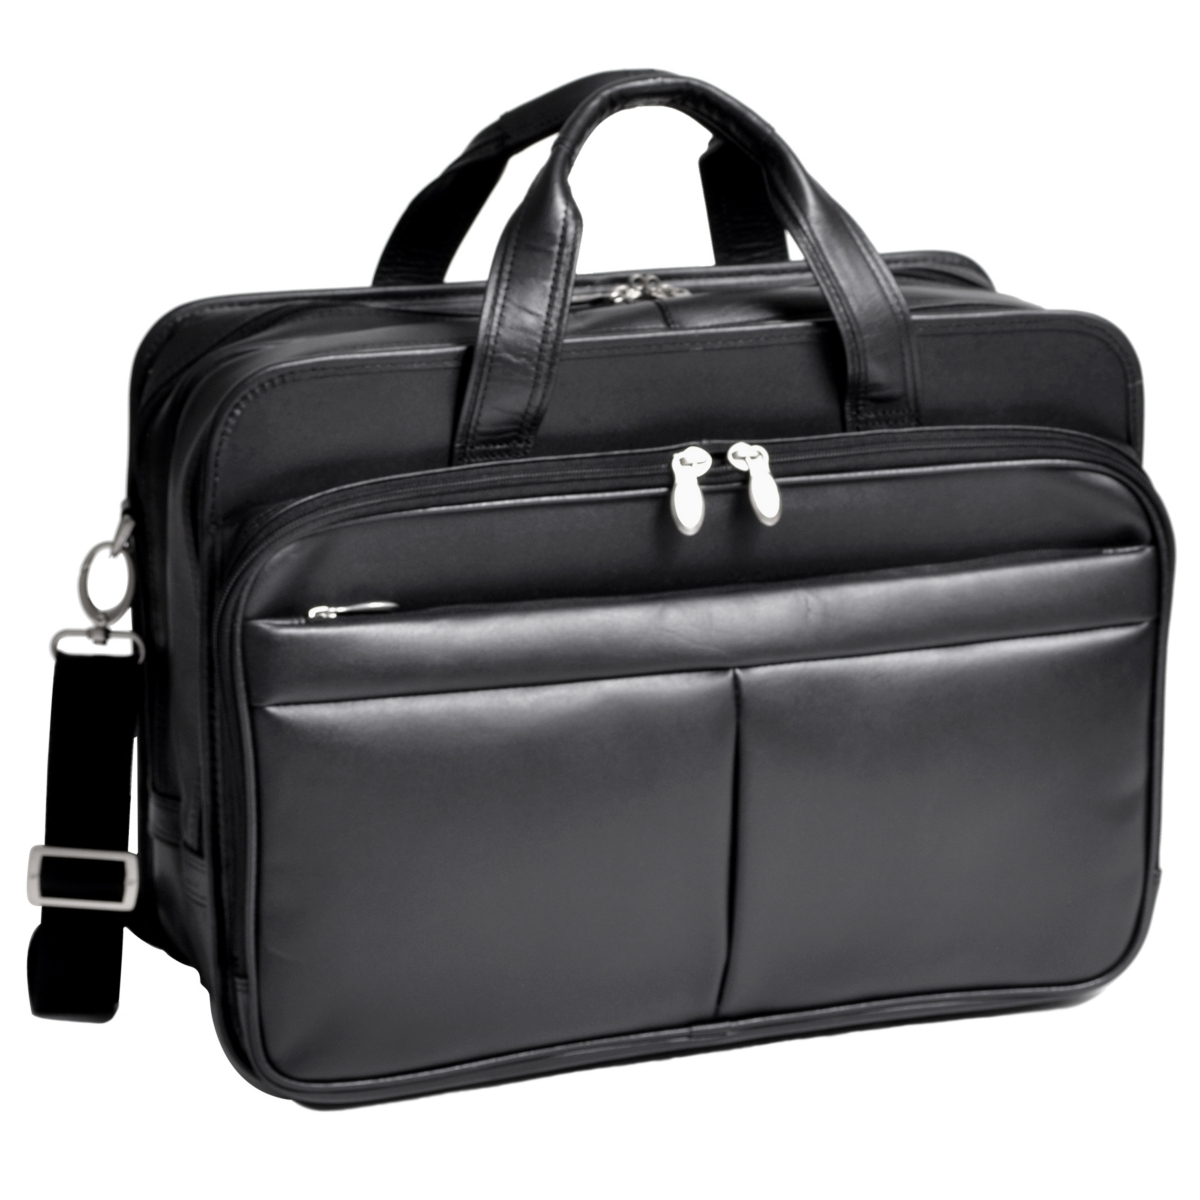 Walton 17" Laptop Briefcase with Removable Sleeve - Black